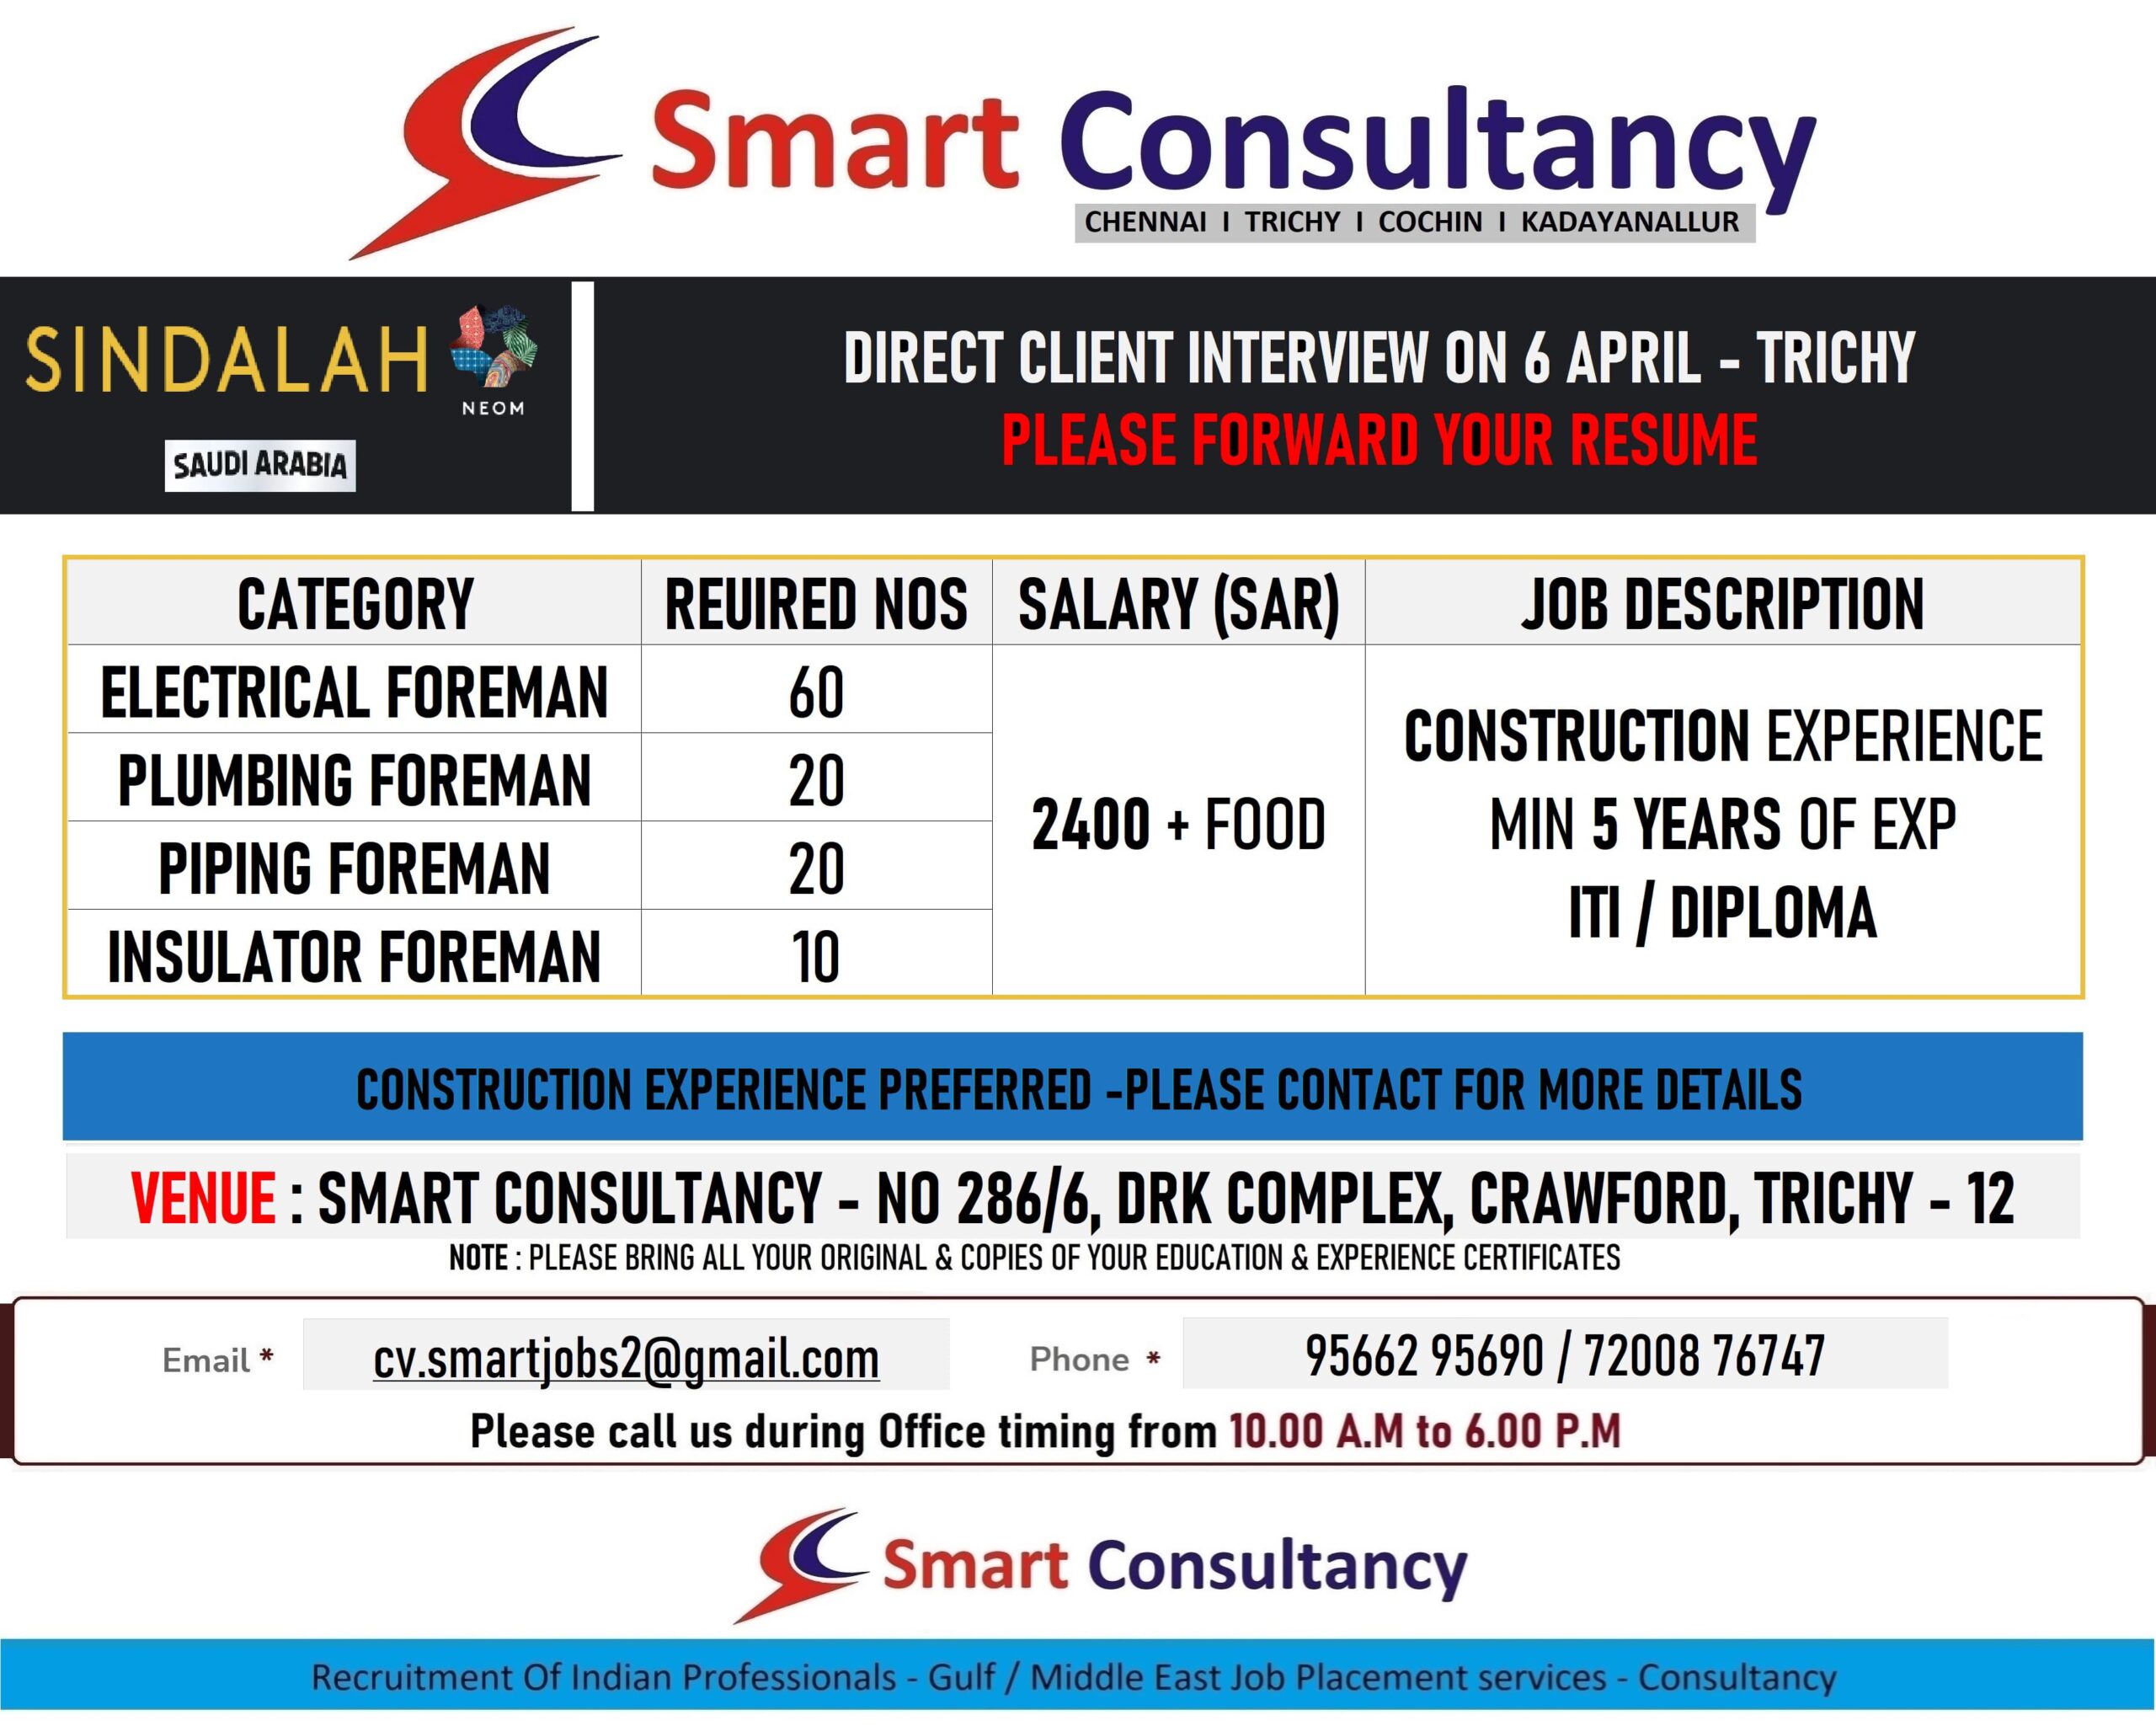 WANTED FOR A LEADING CONSTRUCTION COMPANY – SAUDI / DIRECT CLIENT INTERVIEW ON 6th APRIL – TRICHY.